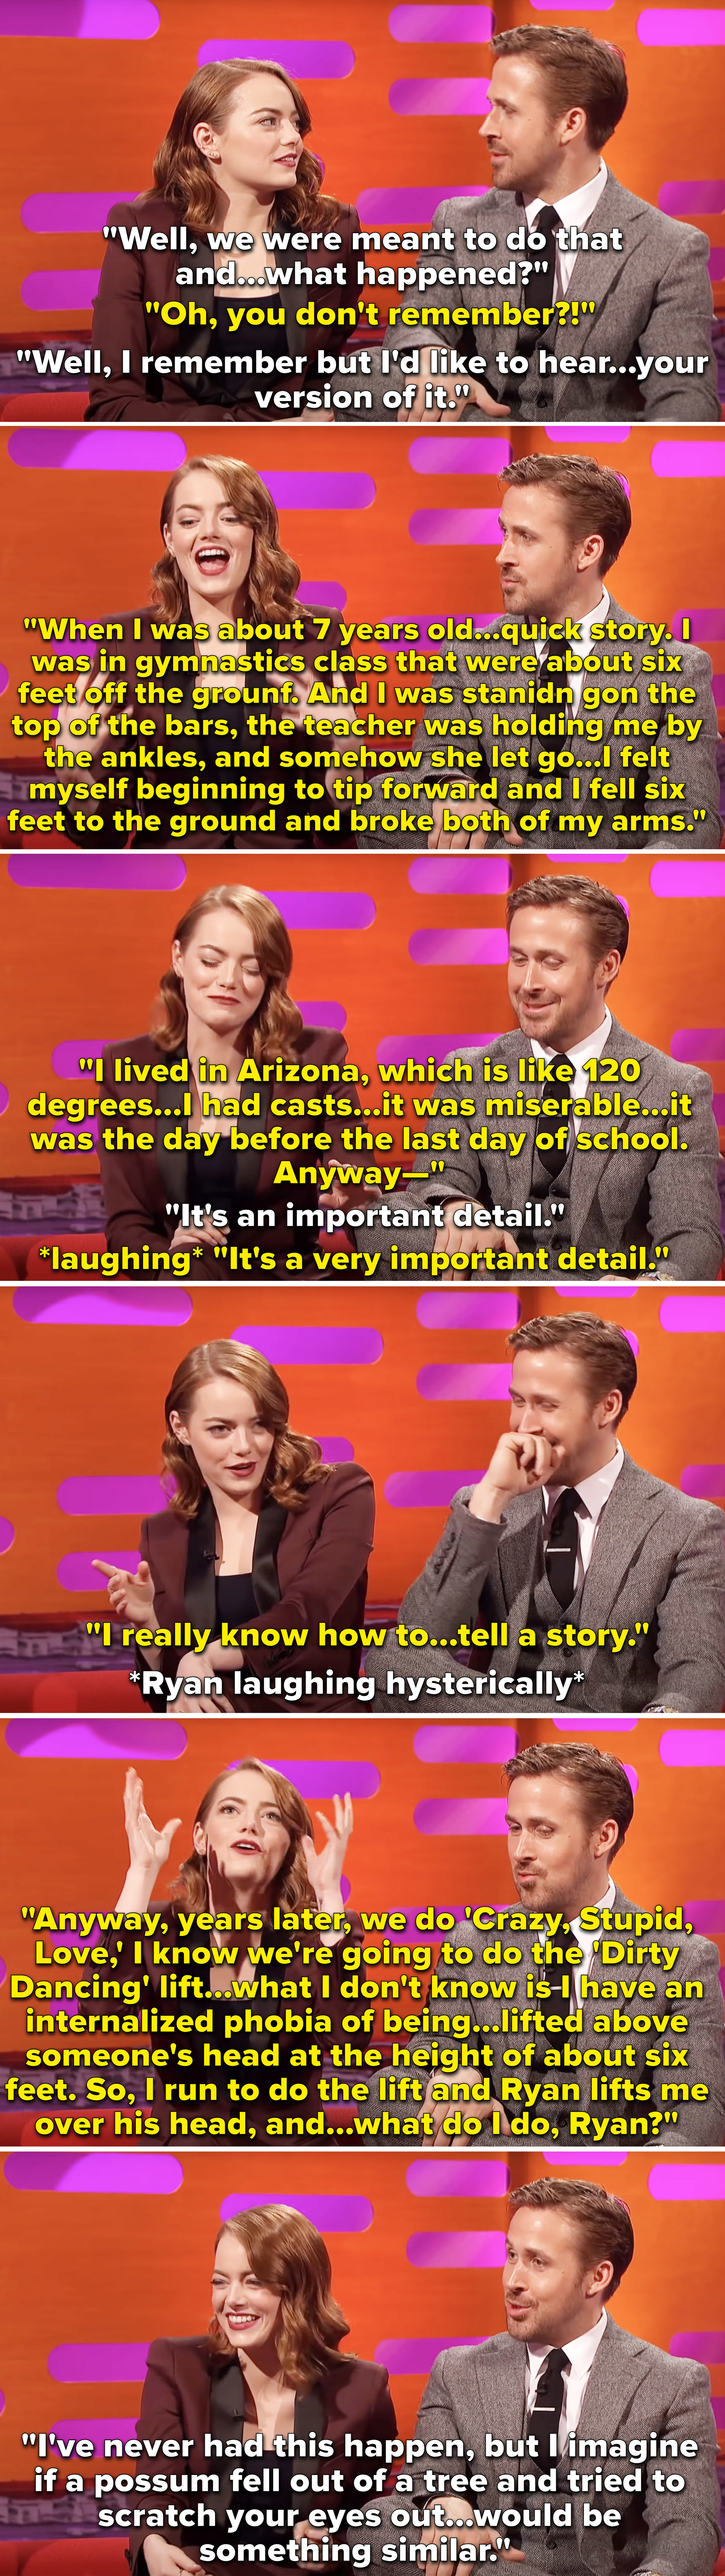 Emma Stone telling a story and Ryan Gosling laughing and looking confused and making fun of her for her seemingly irrelevant details